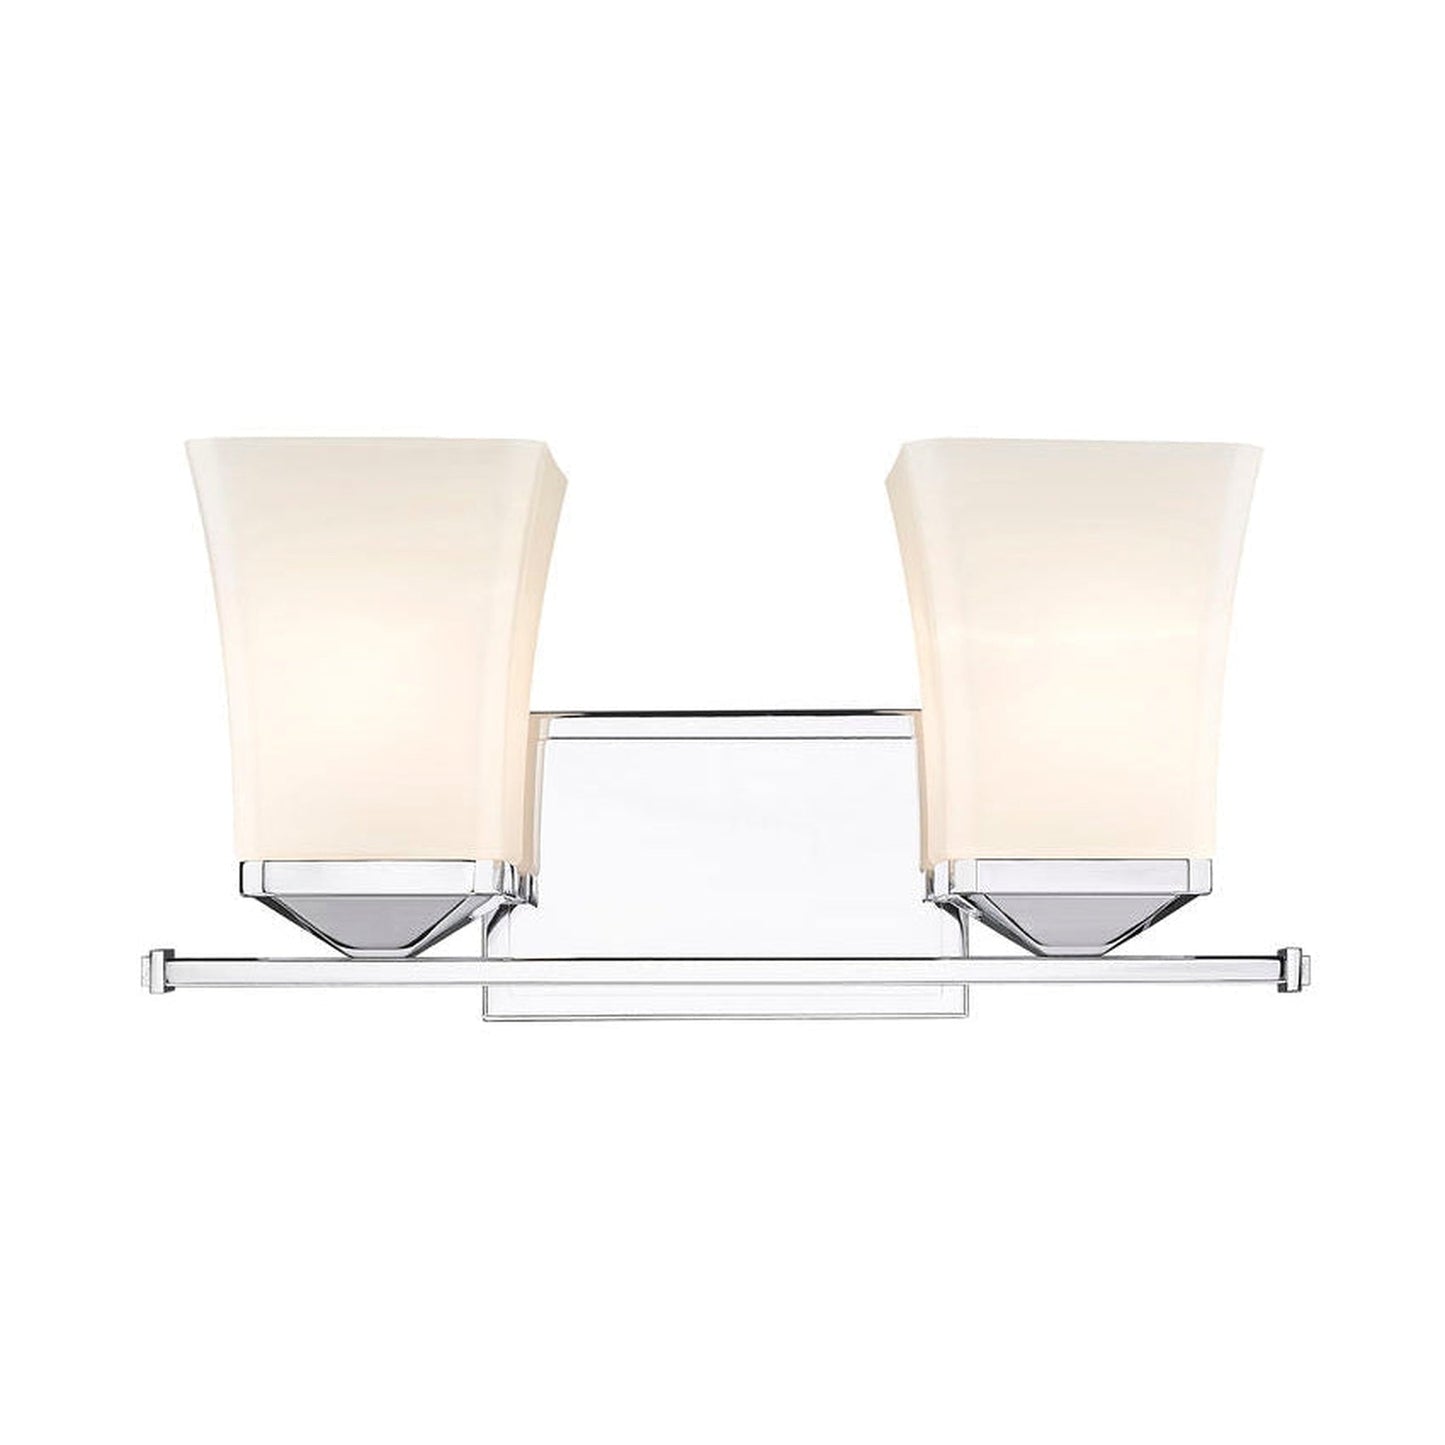 Z-Lite Darcy 16" 2-Light Chrome Vanity Light With Etched Opal Glass Shade